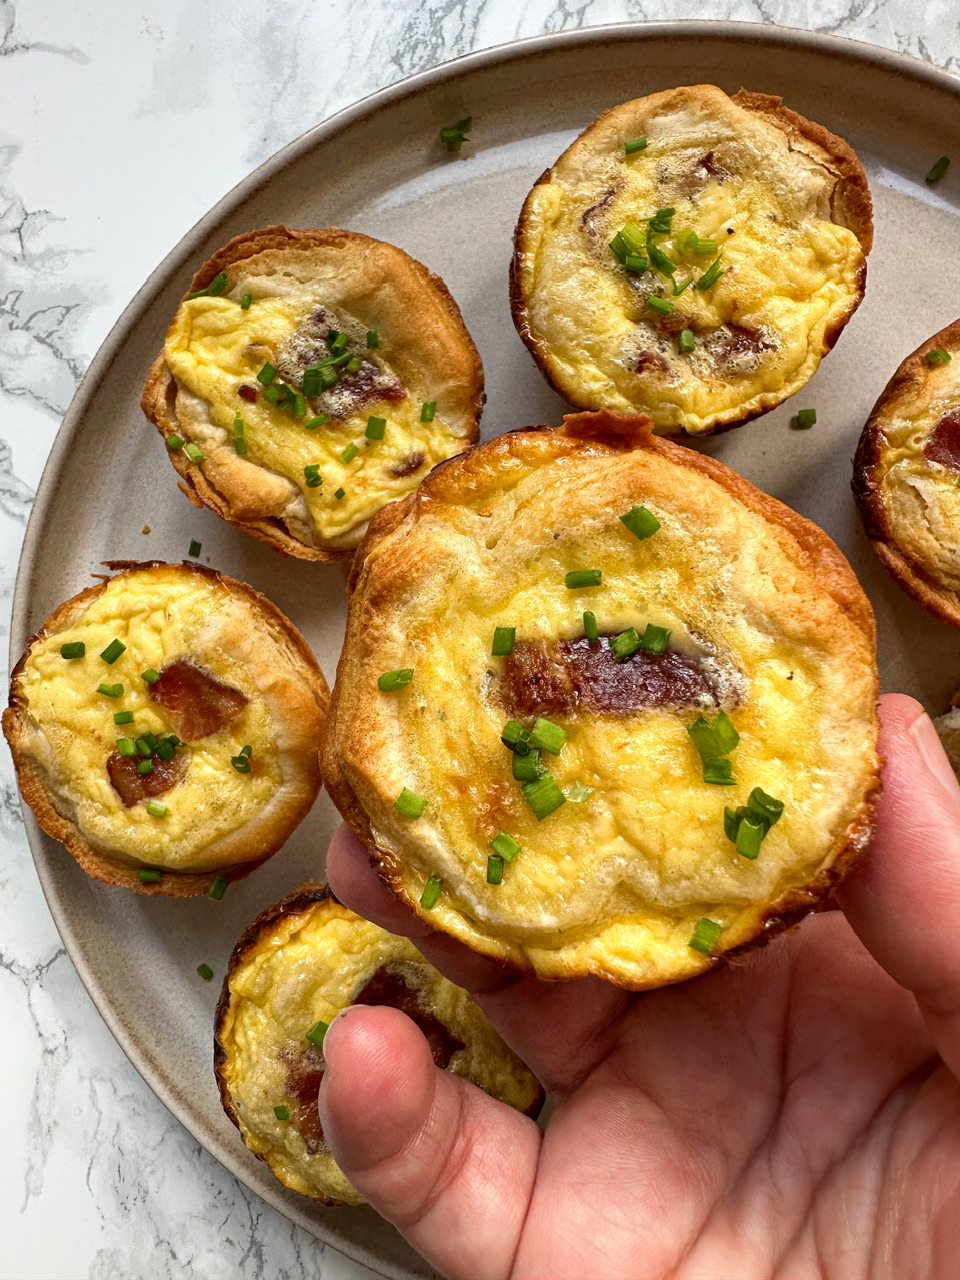 Mini Quiche using store bought biscuit dough for the crust